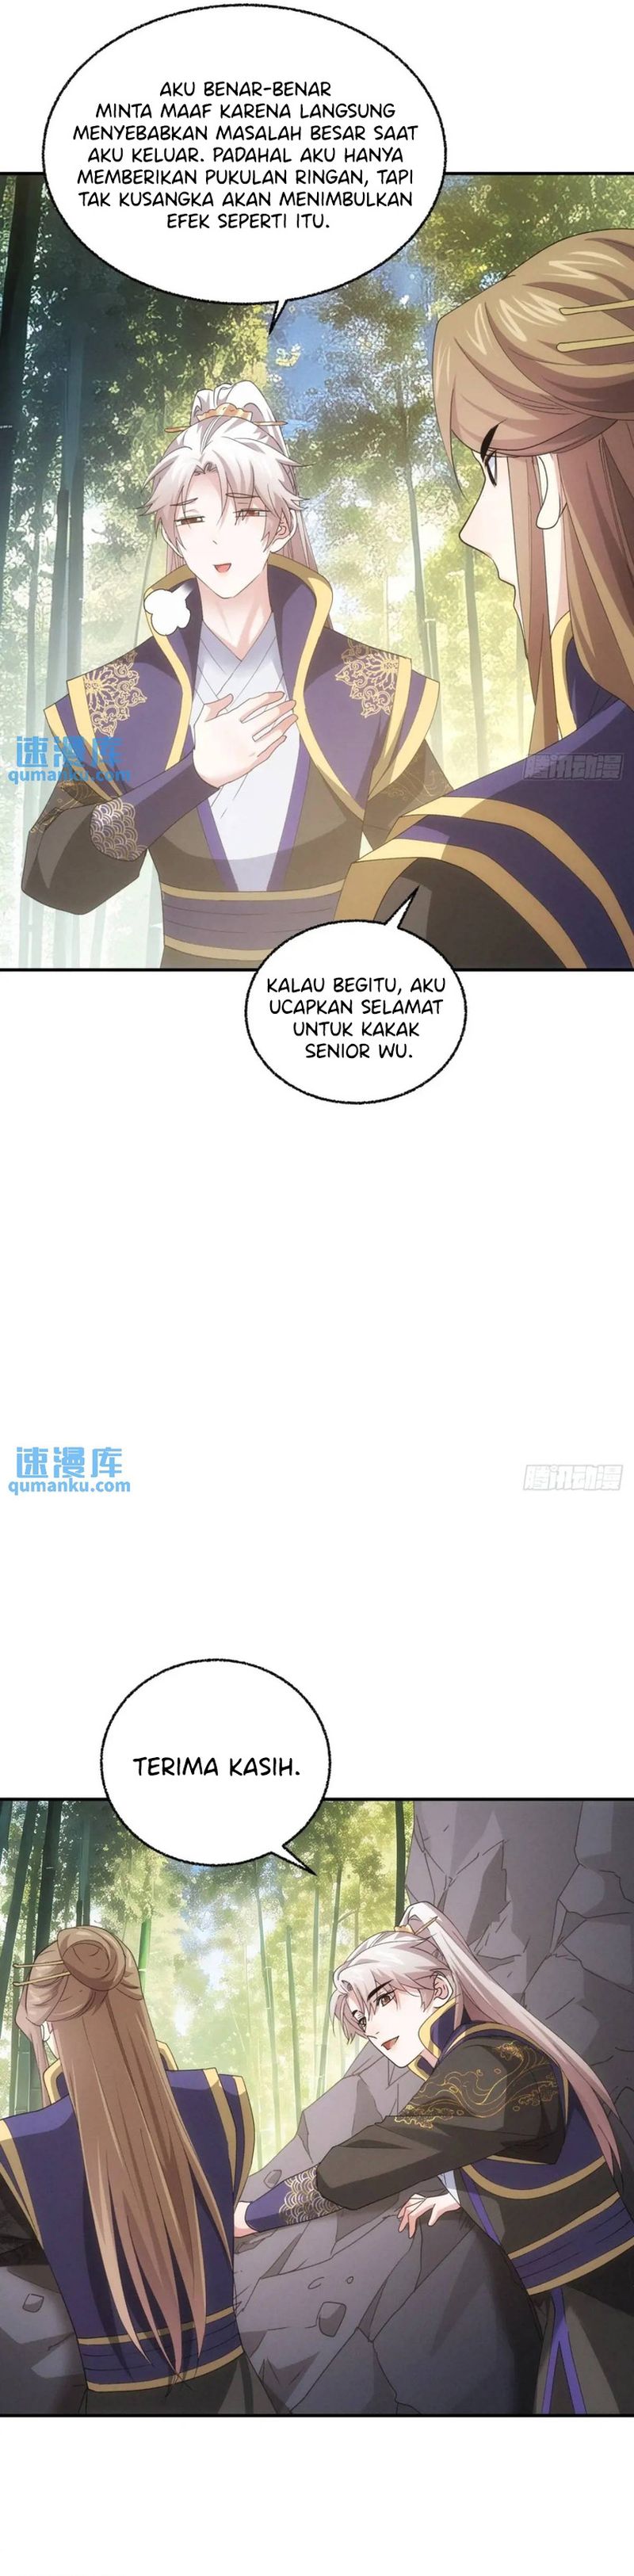 Dilarang COPAS - situs resmi www.mangacanblog.com - Komik i just dont play the card according to the routine 199 - chapter 199 200 Indonesia i just dont play the card according to the routine 199 - chapter 199 Terbaru 9|Baca Manga Komik Indonesia|Mangacan